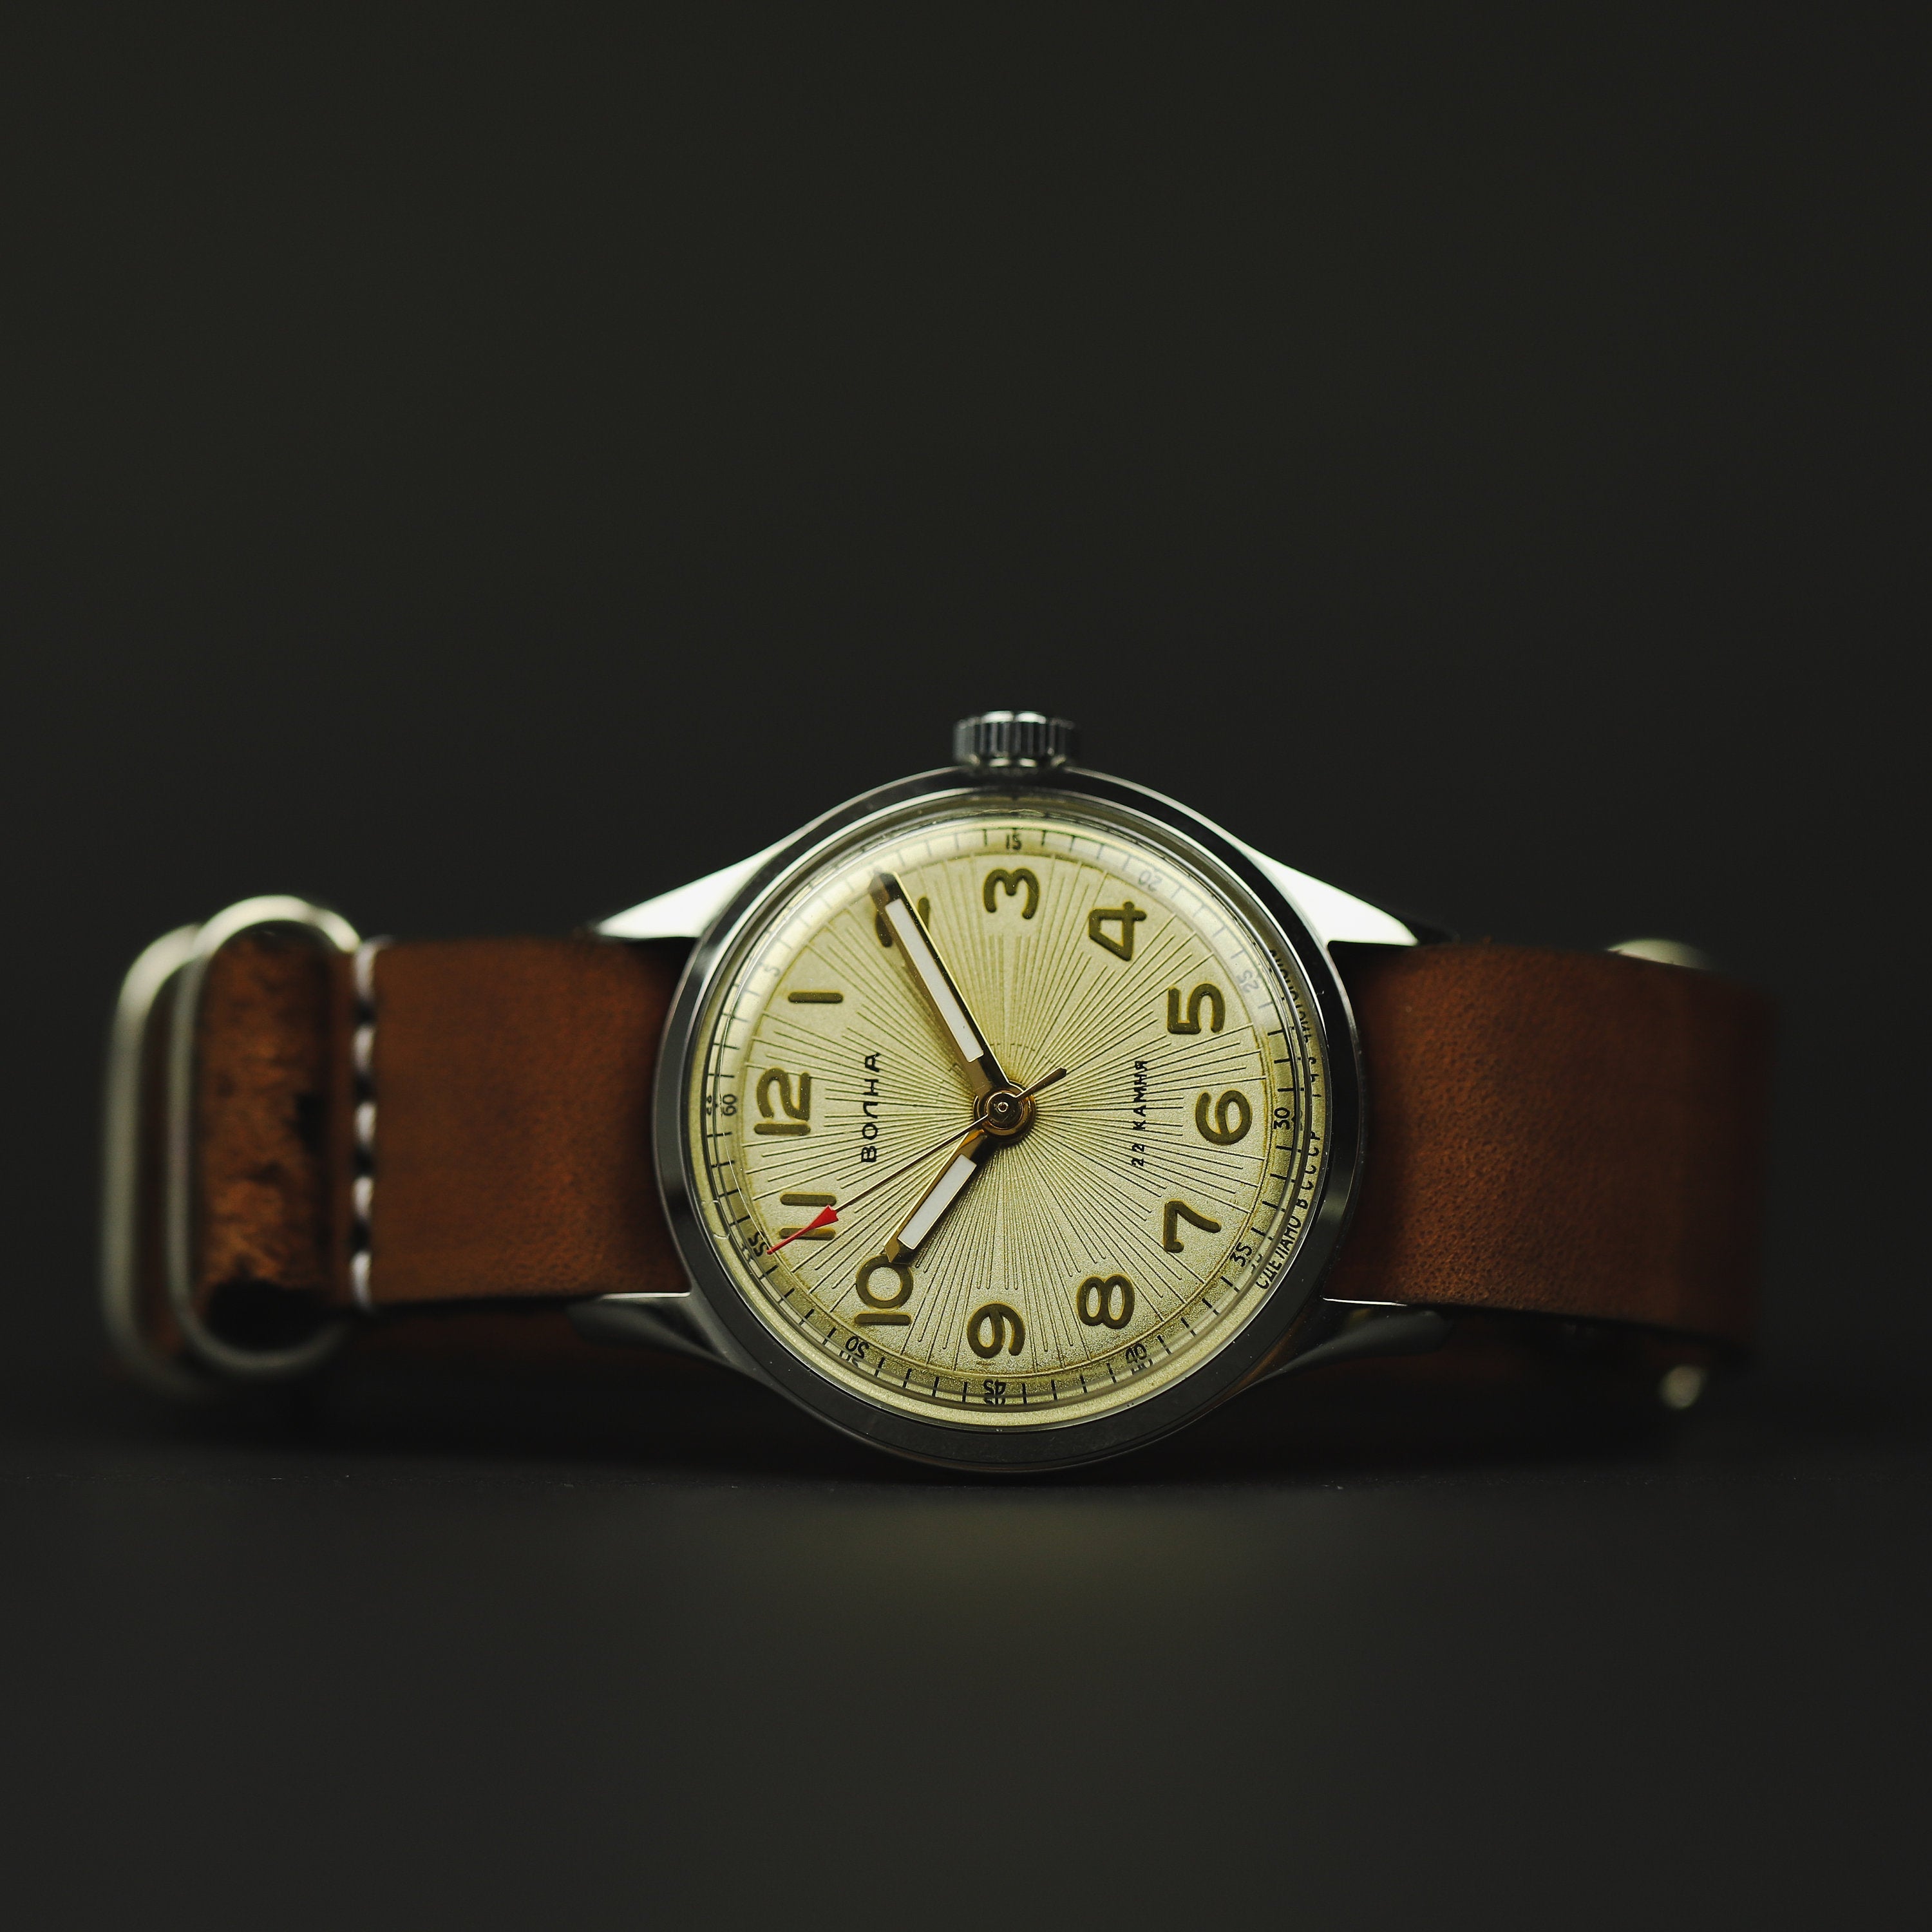 Vintage soviet wristwatch WAVE of 1950 release. Mechanical watch with handmade leather strap